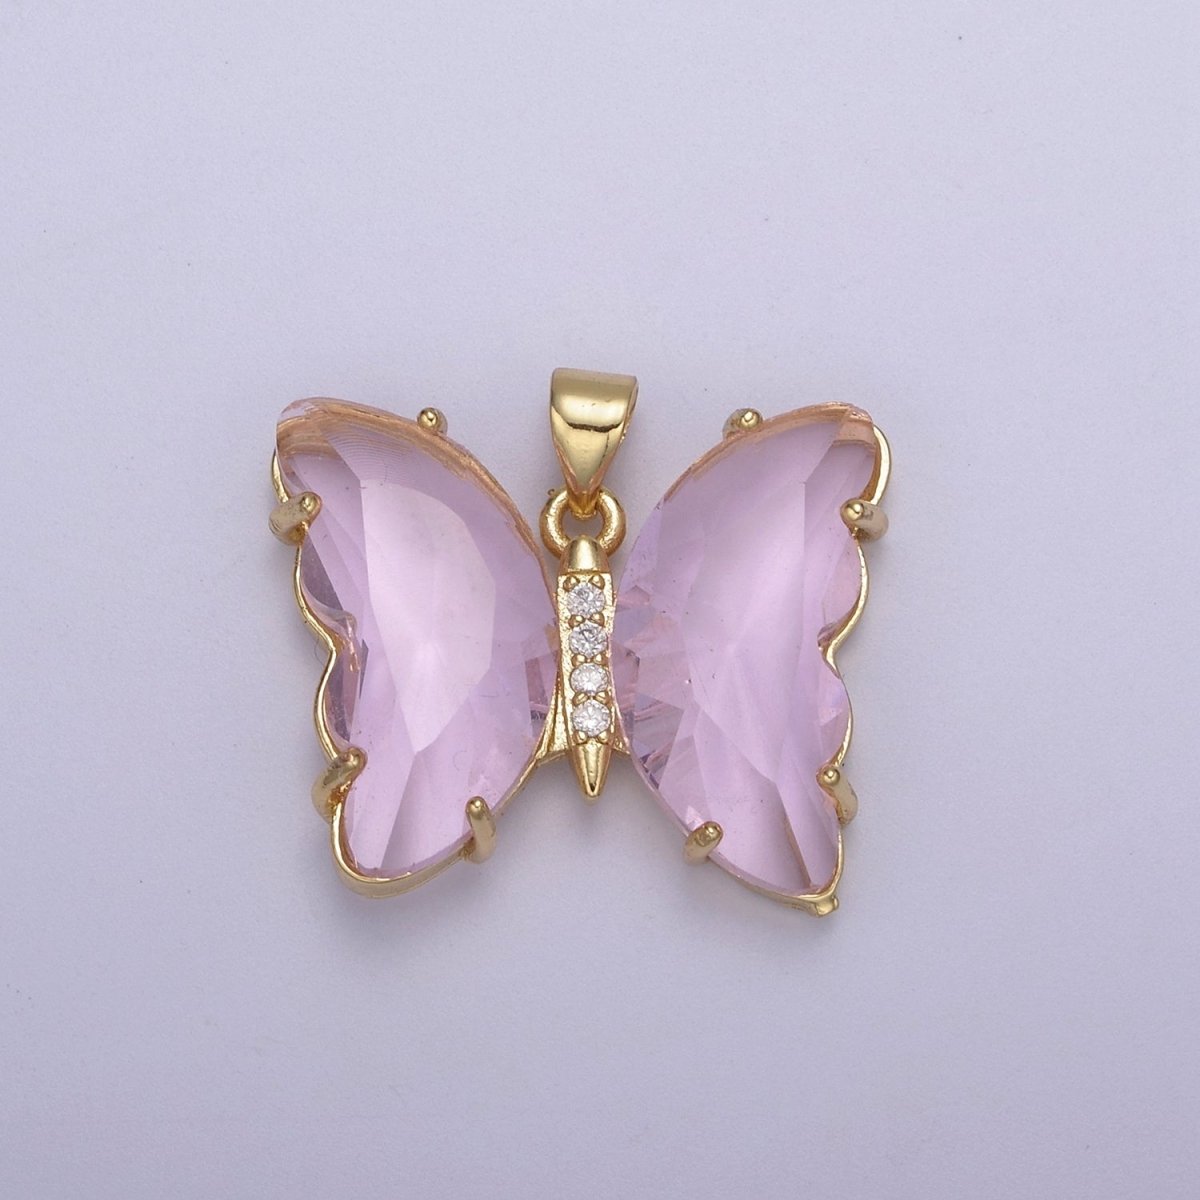 Dainty Mariposa Butterfly Charm Butterfly Charm Glass Pendant for Necklace Earring Bracelet Component in 14k Gold Filled Tarnish Free H-844 H-845 H-847 H-861 - DLUXCA